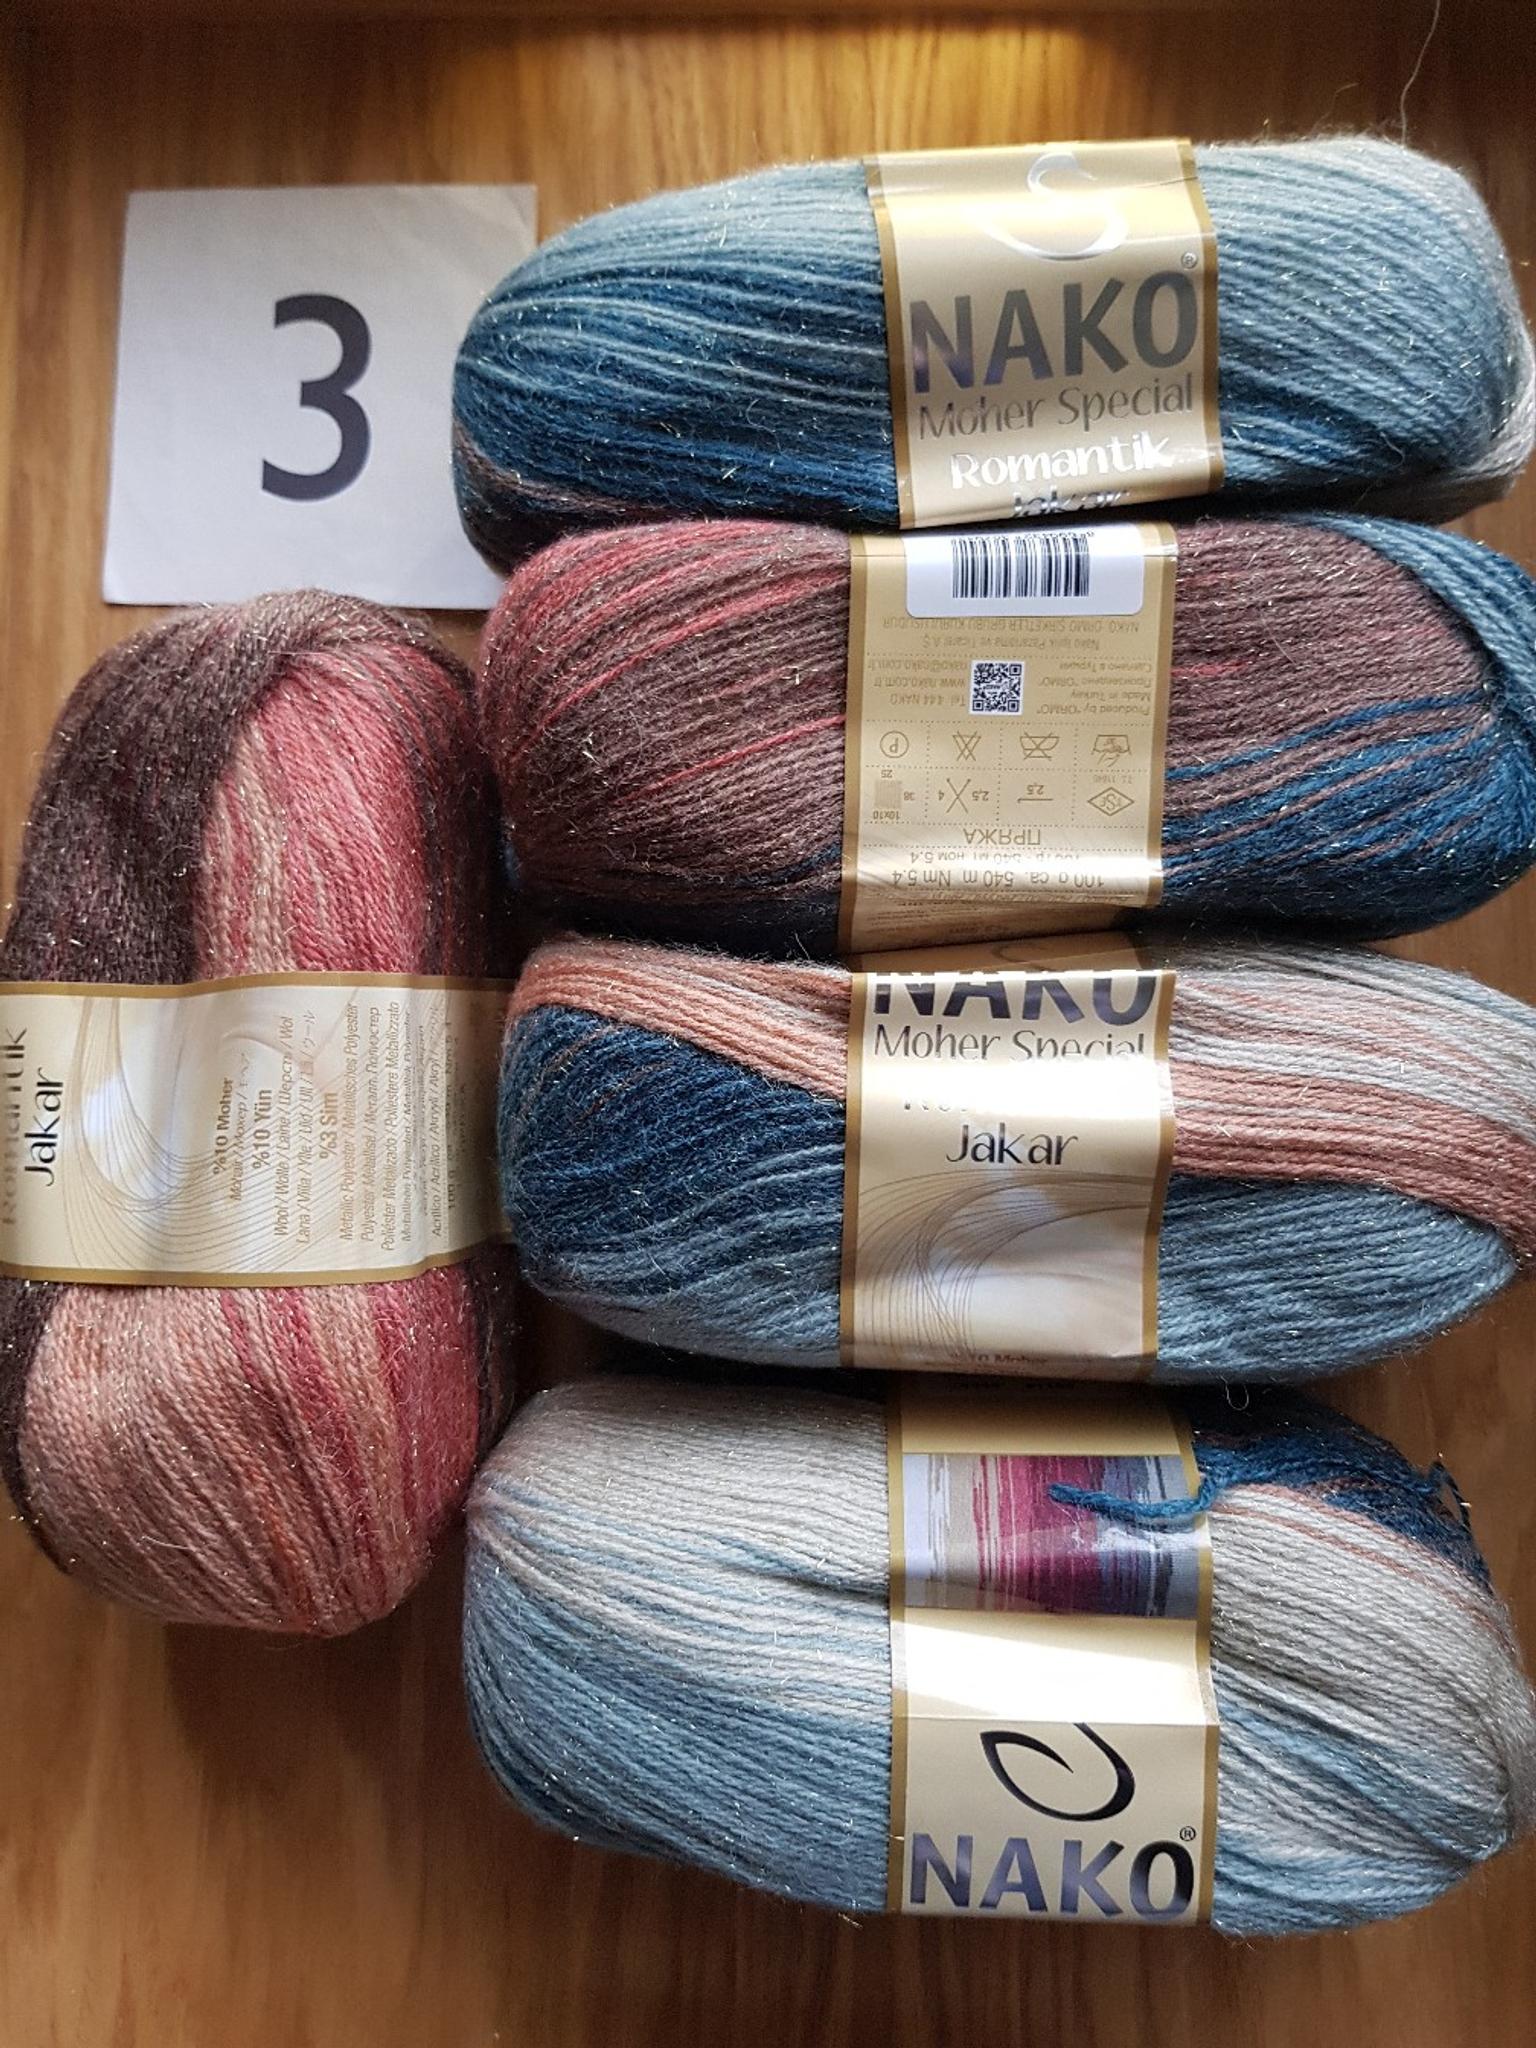 Nako 10% Mohair Special Knitting Yarn/Wool With Sparkly Metallic Thread 500g